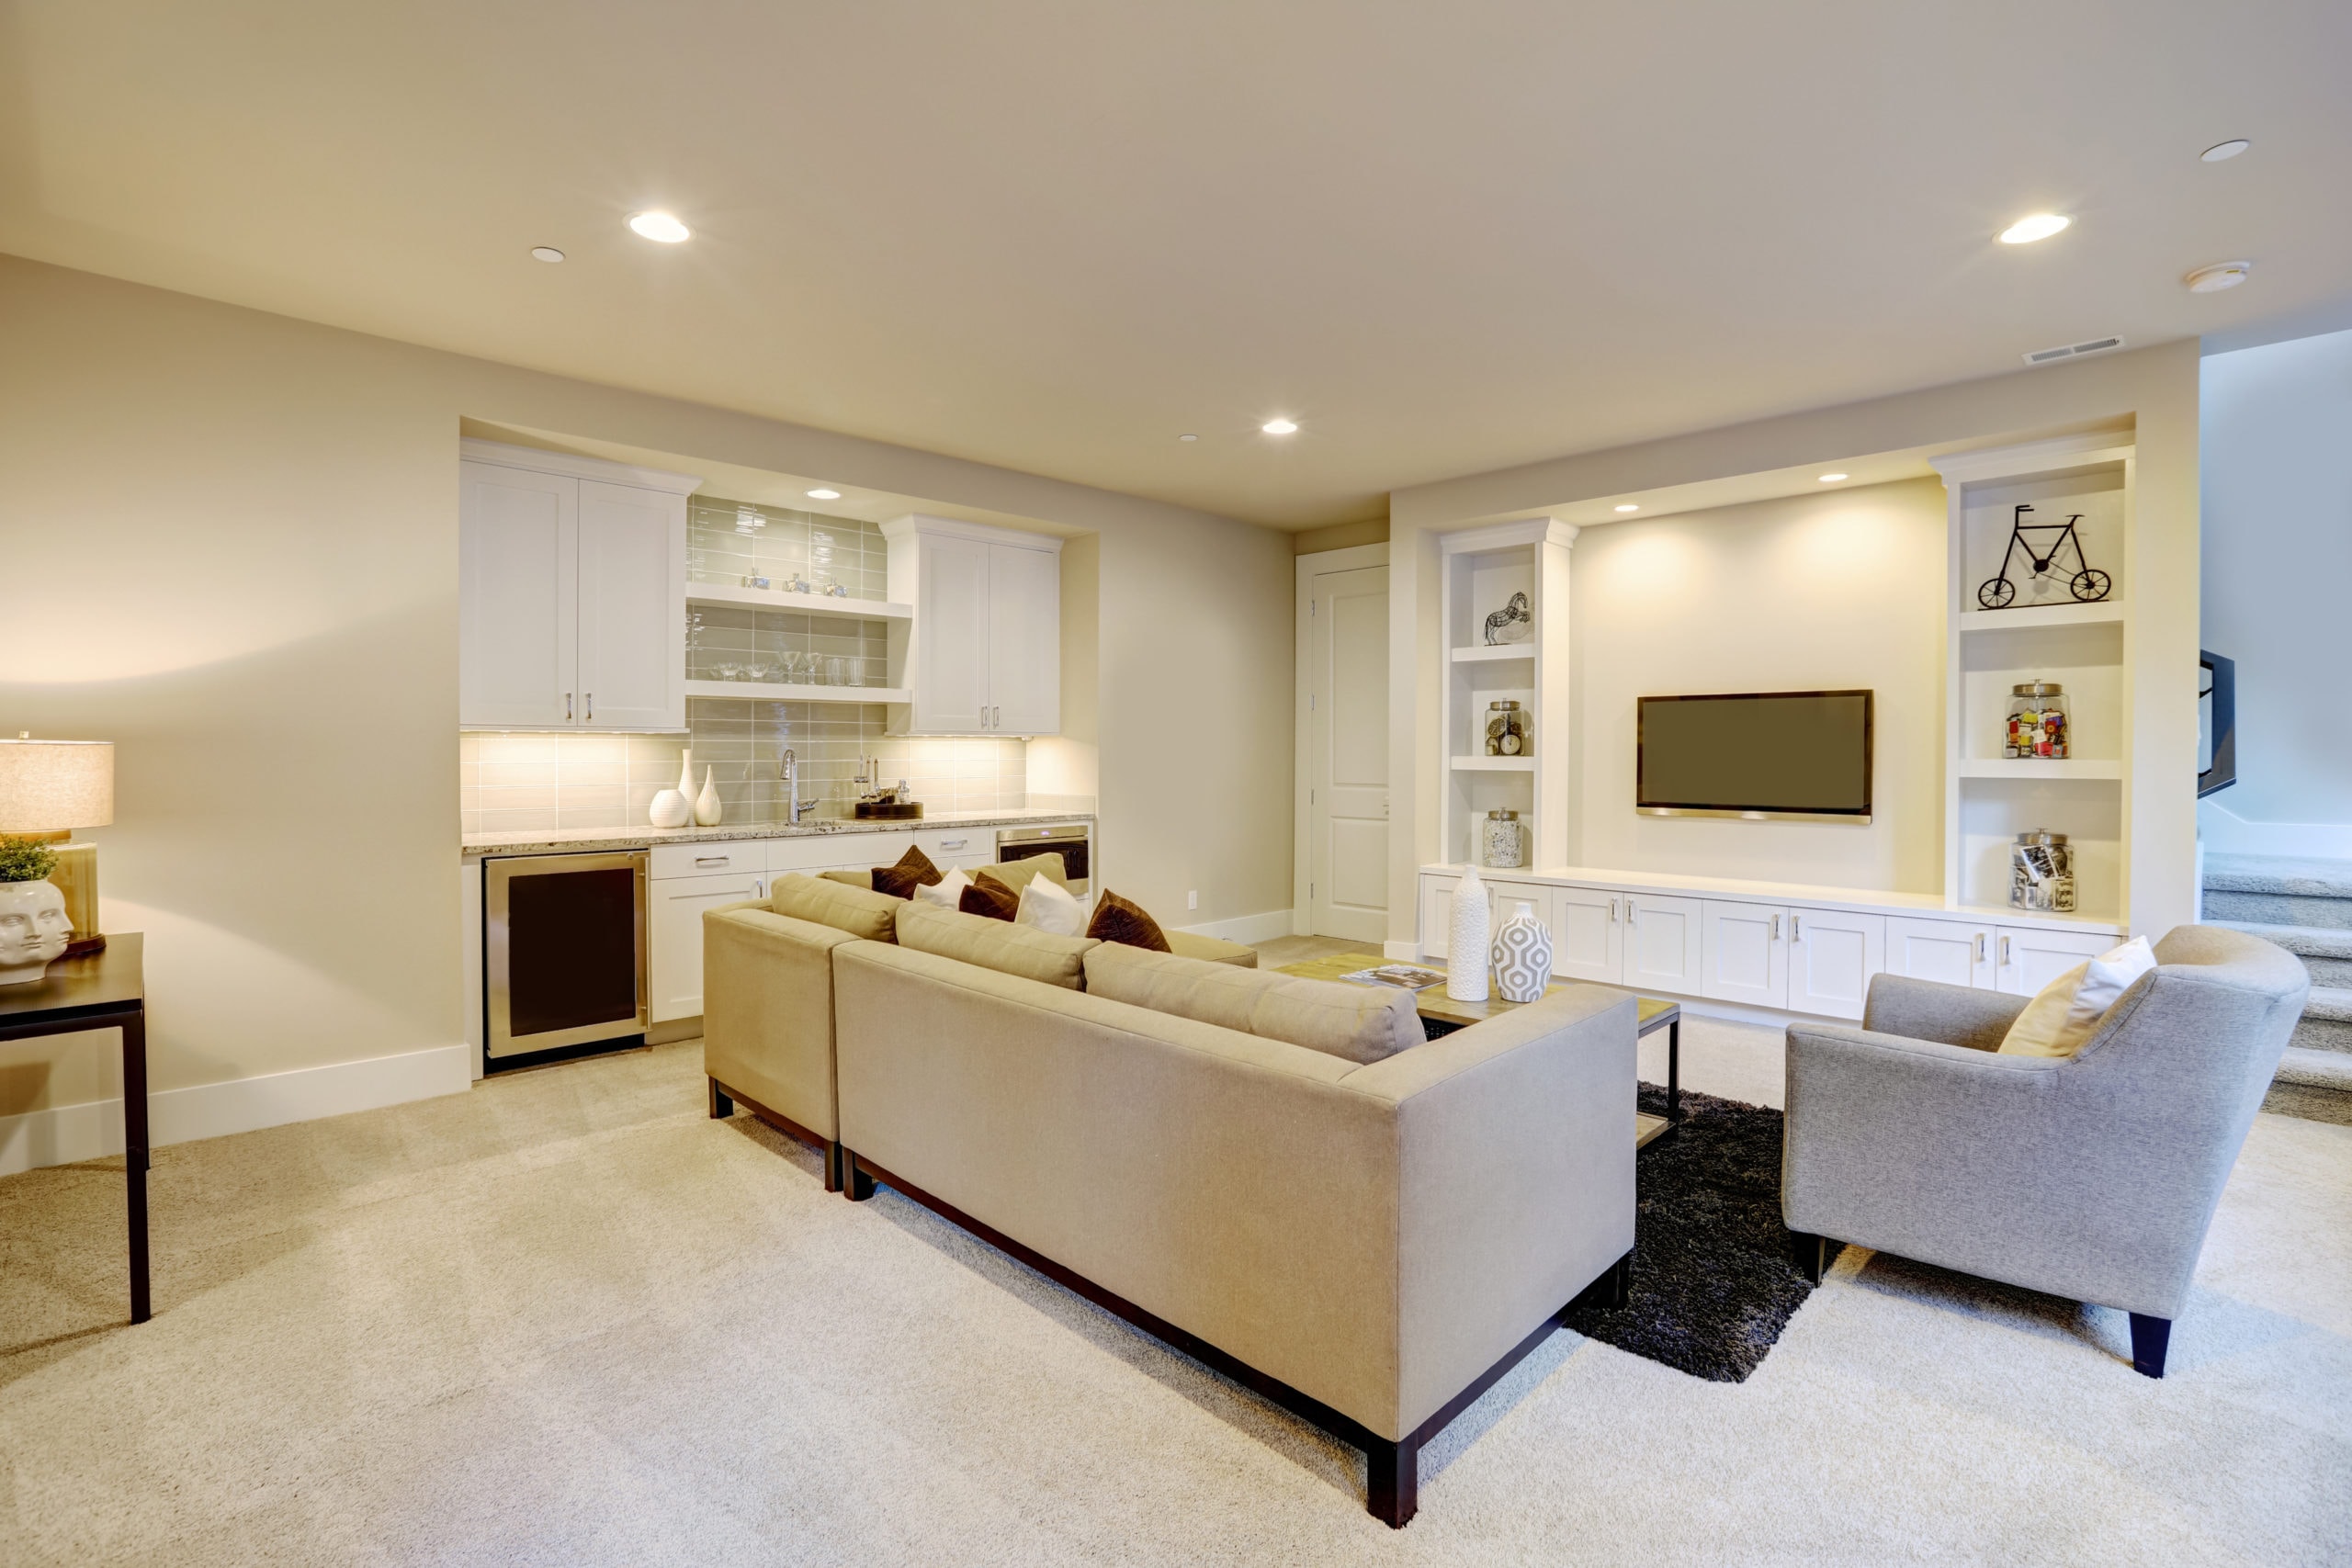 luxury space showing basement finish cost